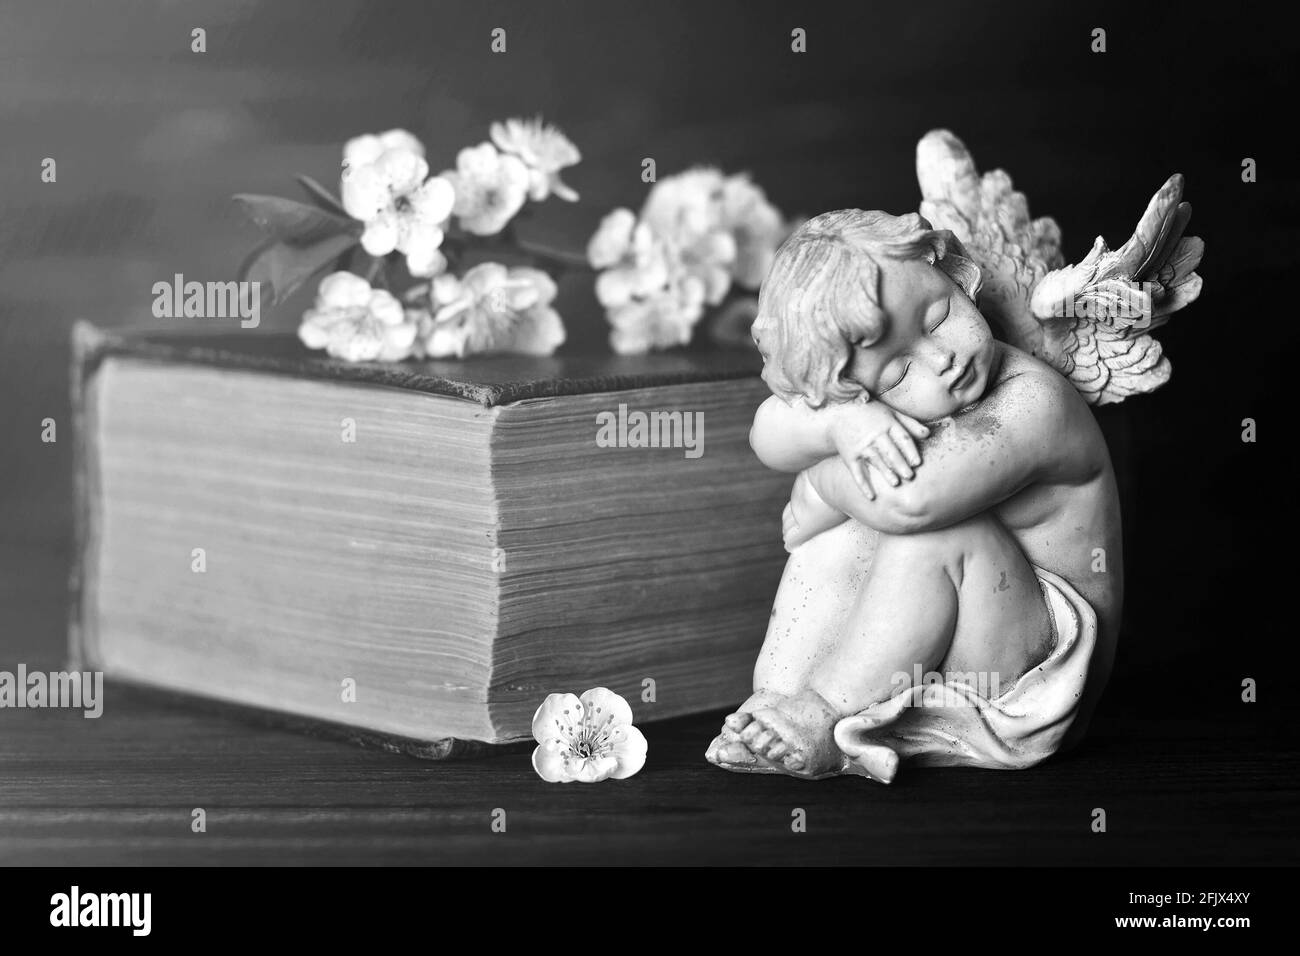 Guardian angel, spring flowers and old book Stock Photo